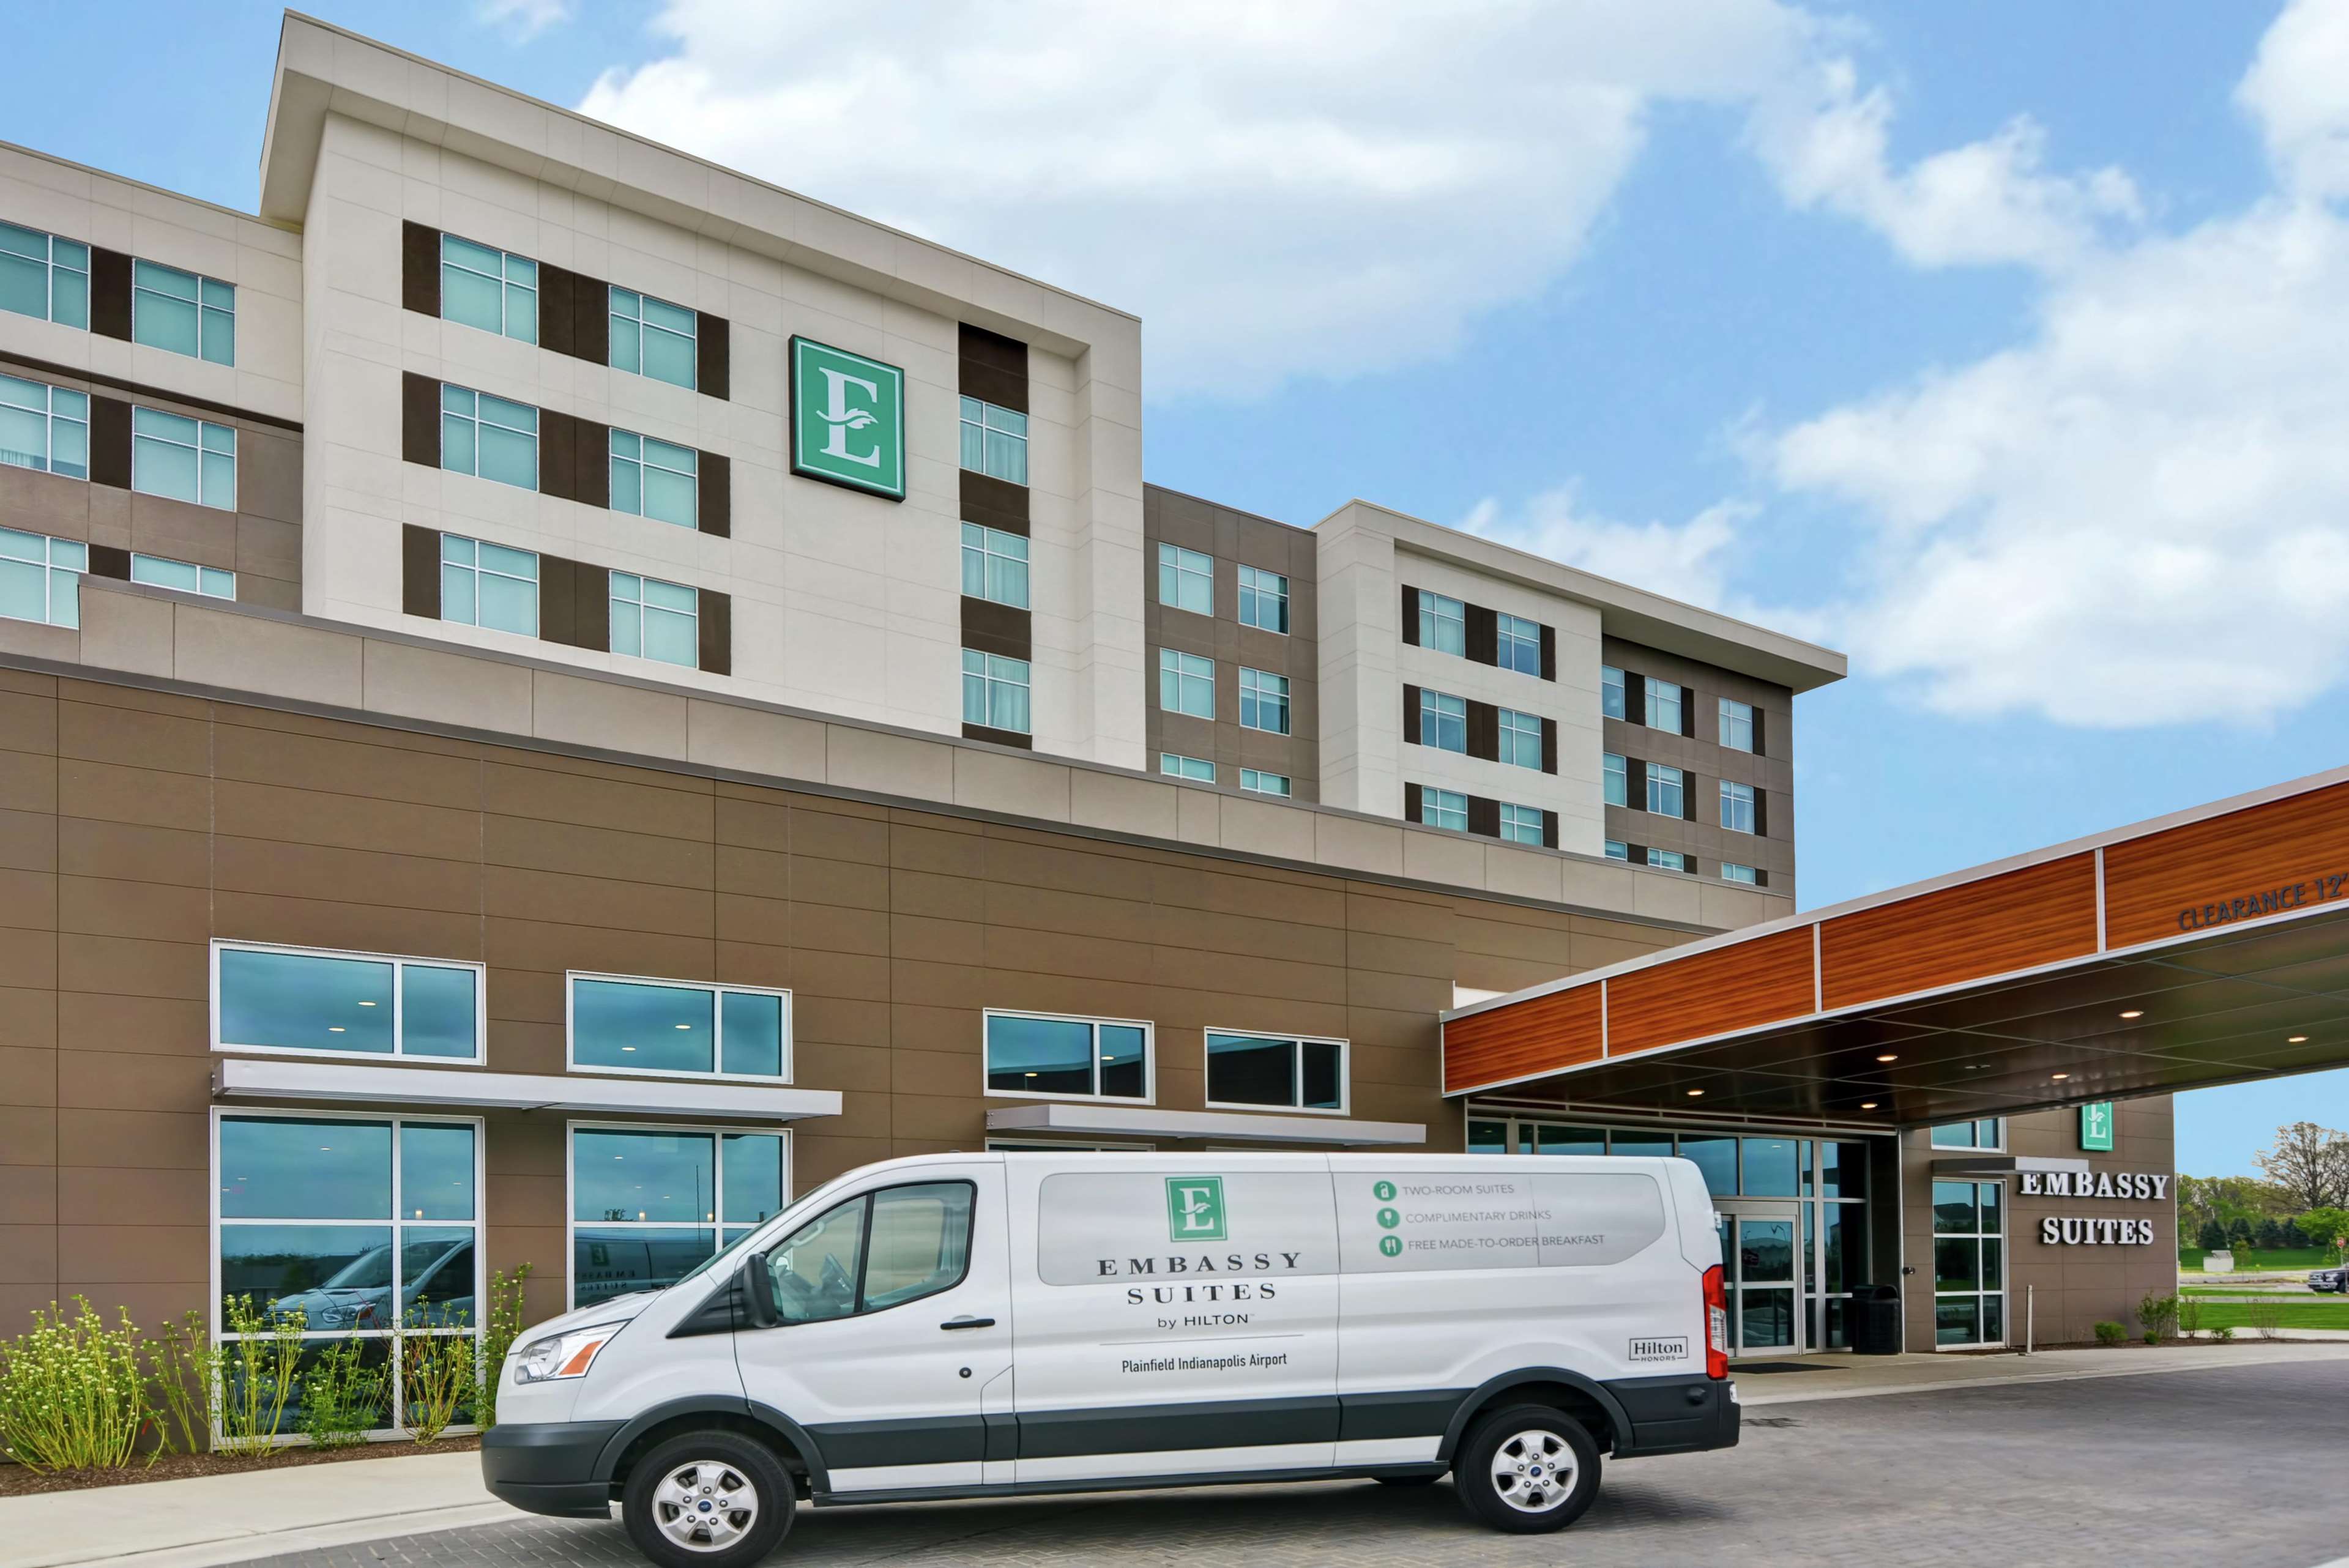 Embassy Suites by Hilton Plainfield Indianapolis Airport 6089 Clarks Creek Road Plainfield, IN Hotels & Motels - MapQuest